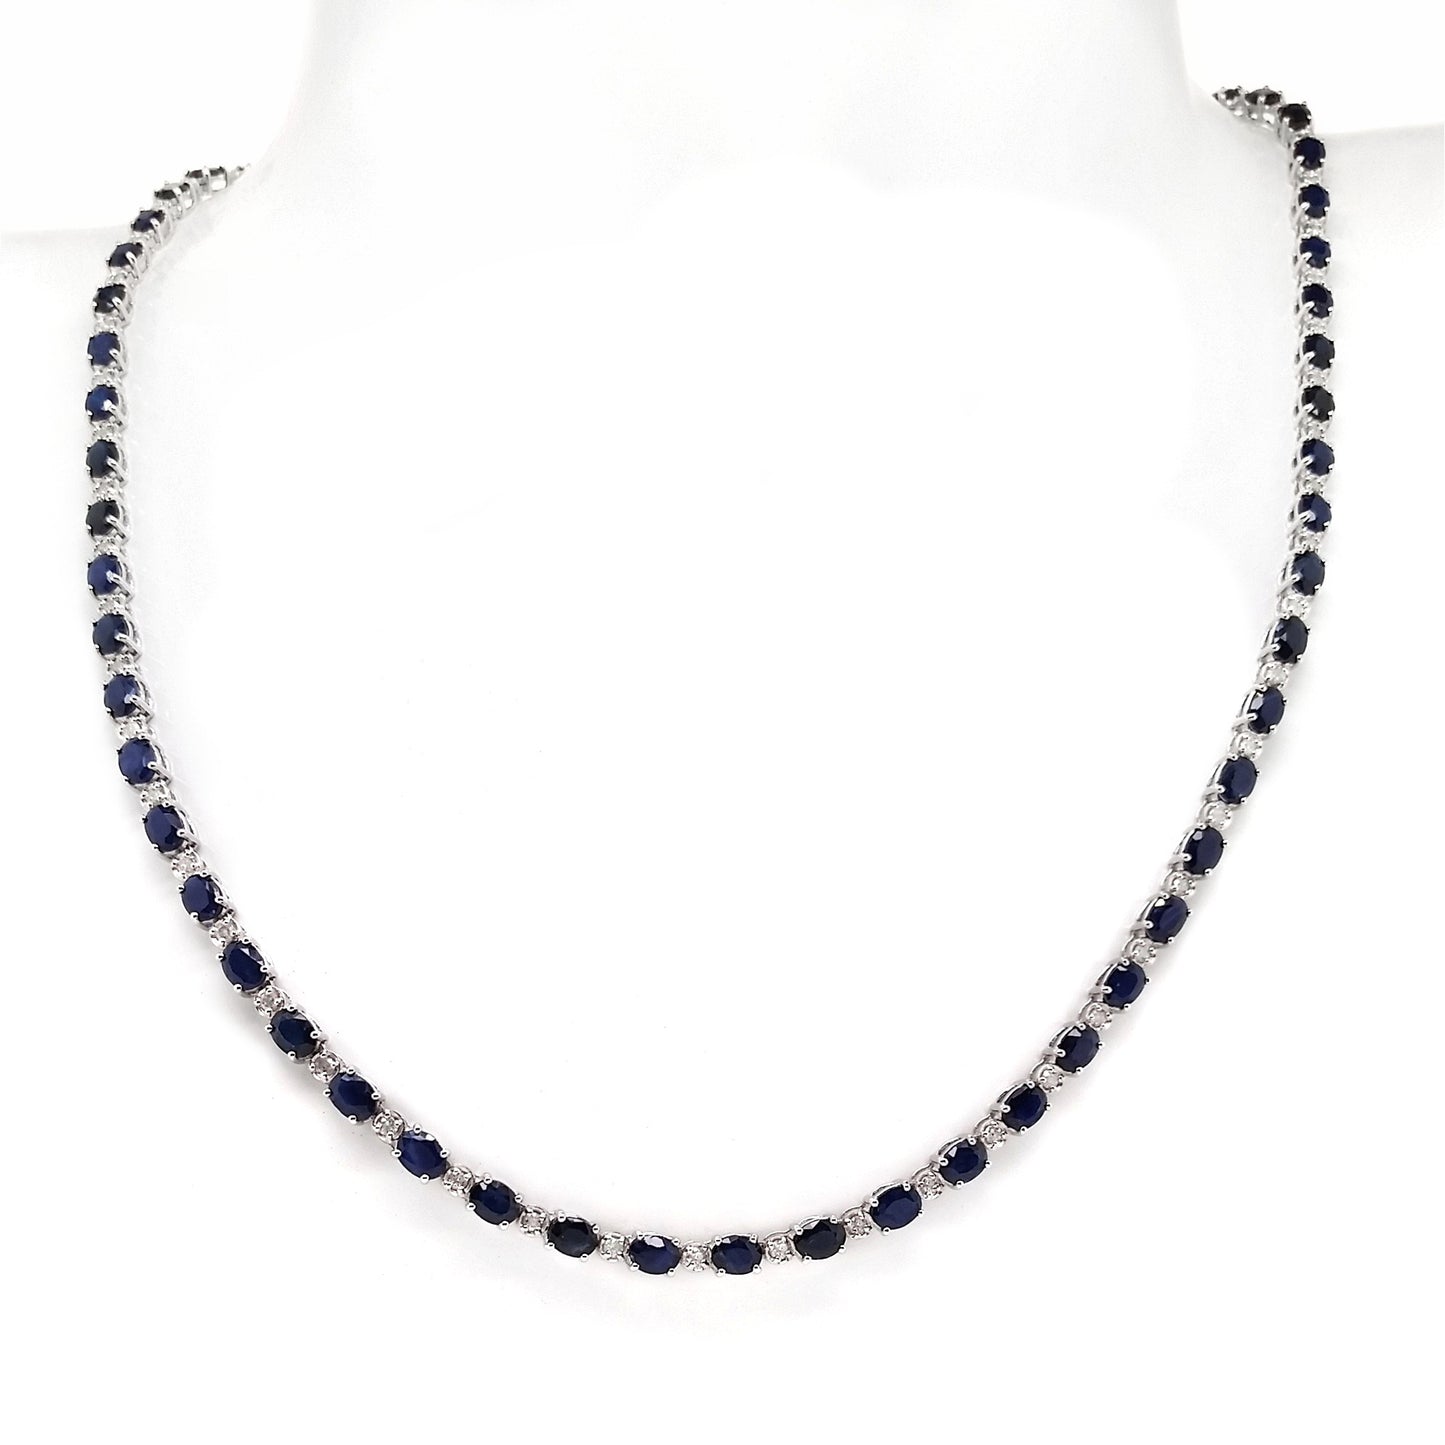 12.68ct NATURAL SAPPHIRES and 0.90ct NATURAL DIAMONDS set with 18K White Gold Necklace